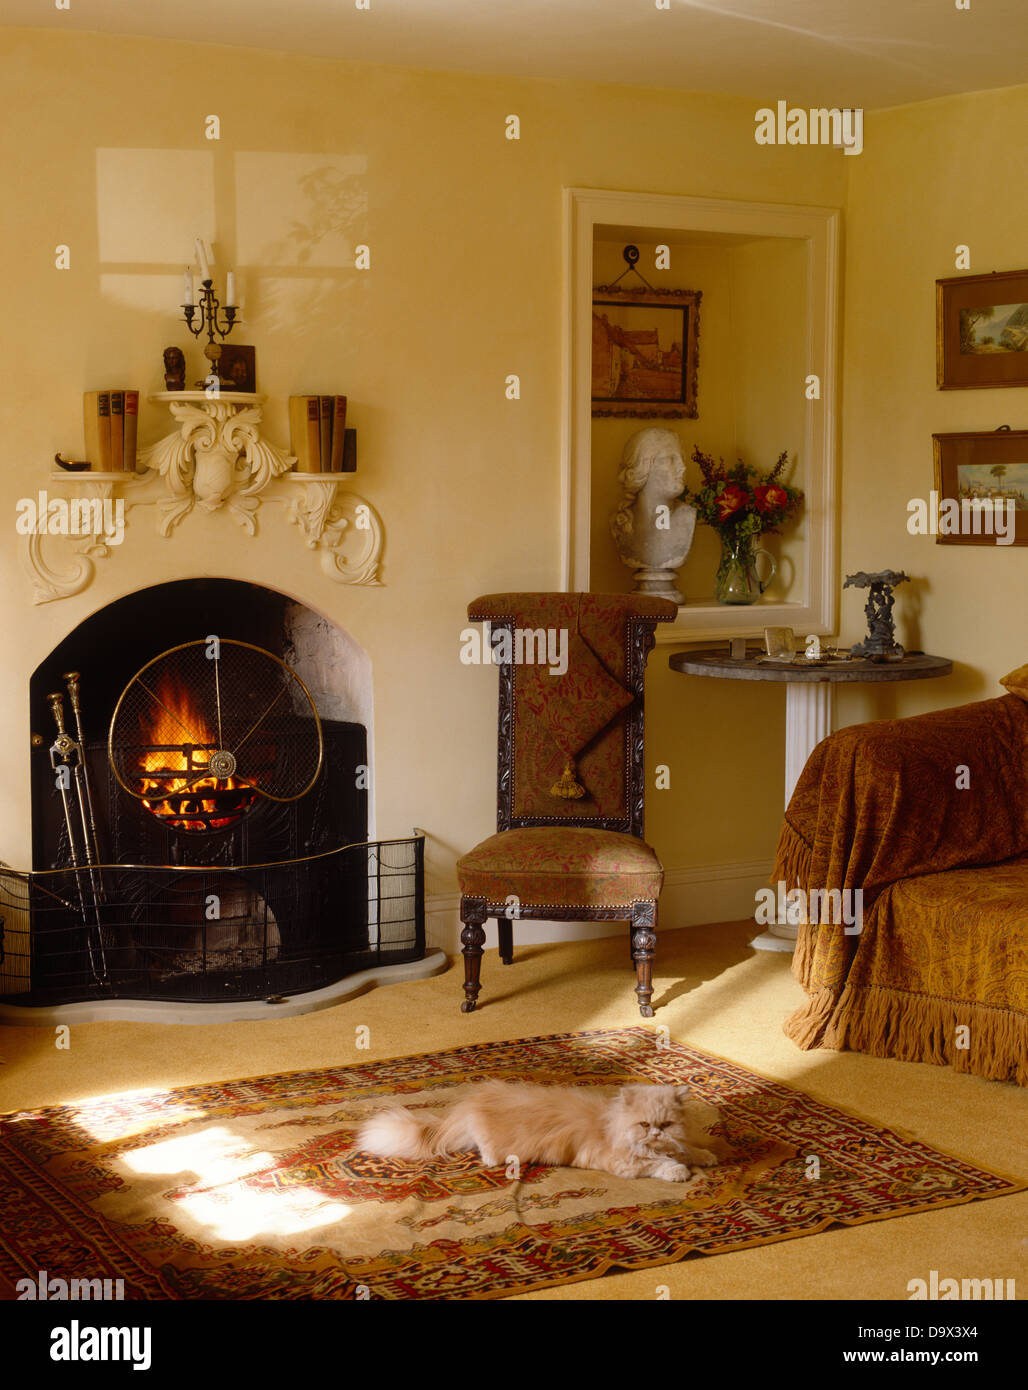 Cat on rug in front of fireplace with lit fire and unusual mantel shelf in living room  with antique chair in front of alcove Stock Photo